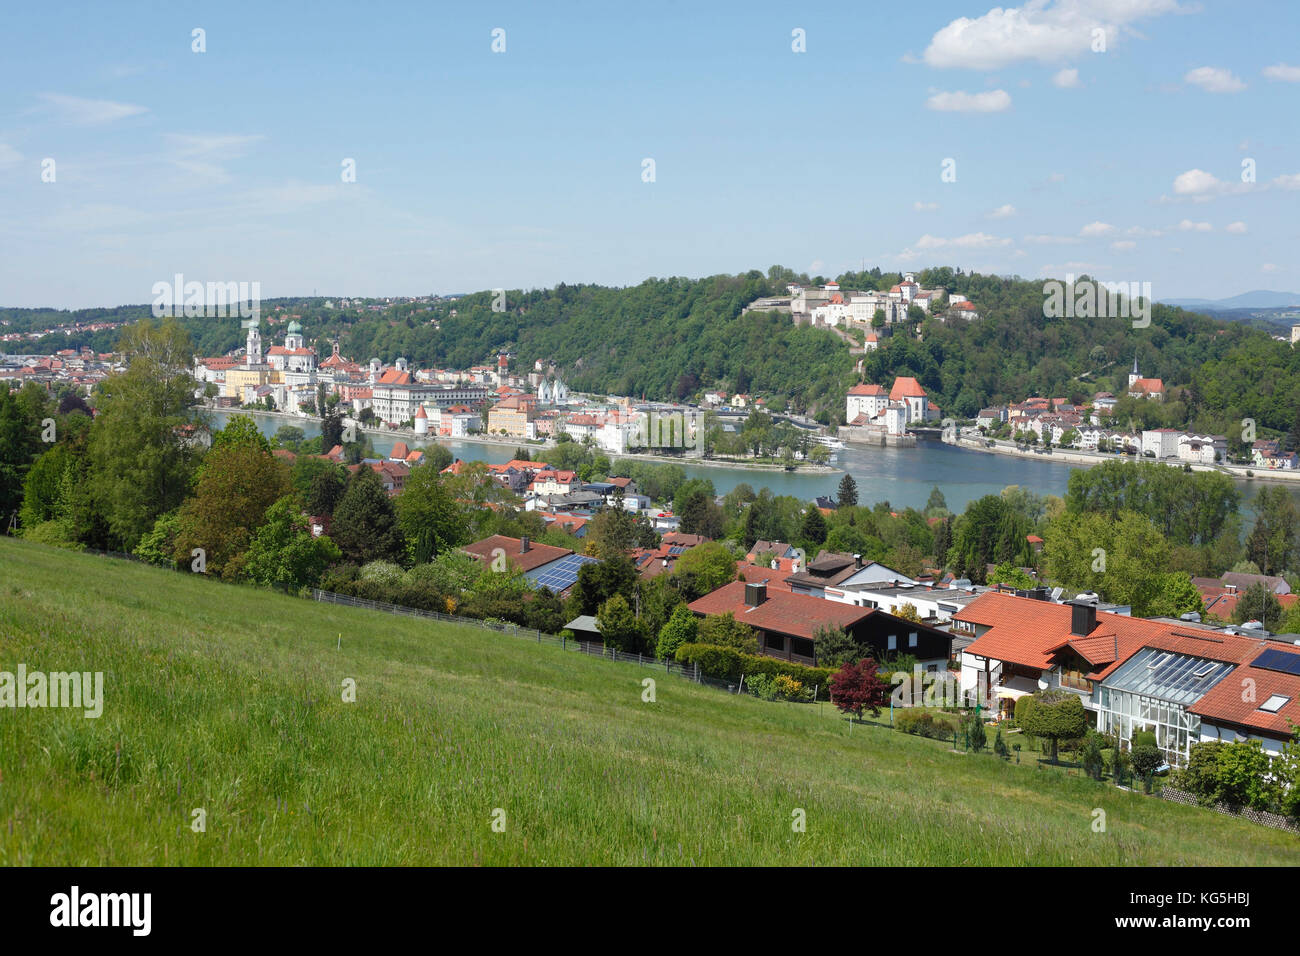 View to Drei-Flüsse-Eck, Old Town, meadow and residential houses, Passau, Lower Bavaria, Bavaria, Germany, Europe, Stock Photo